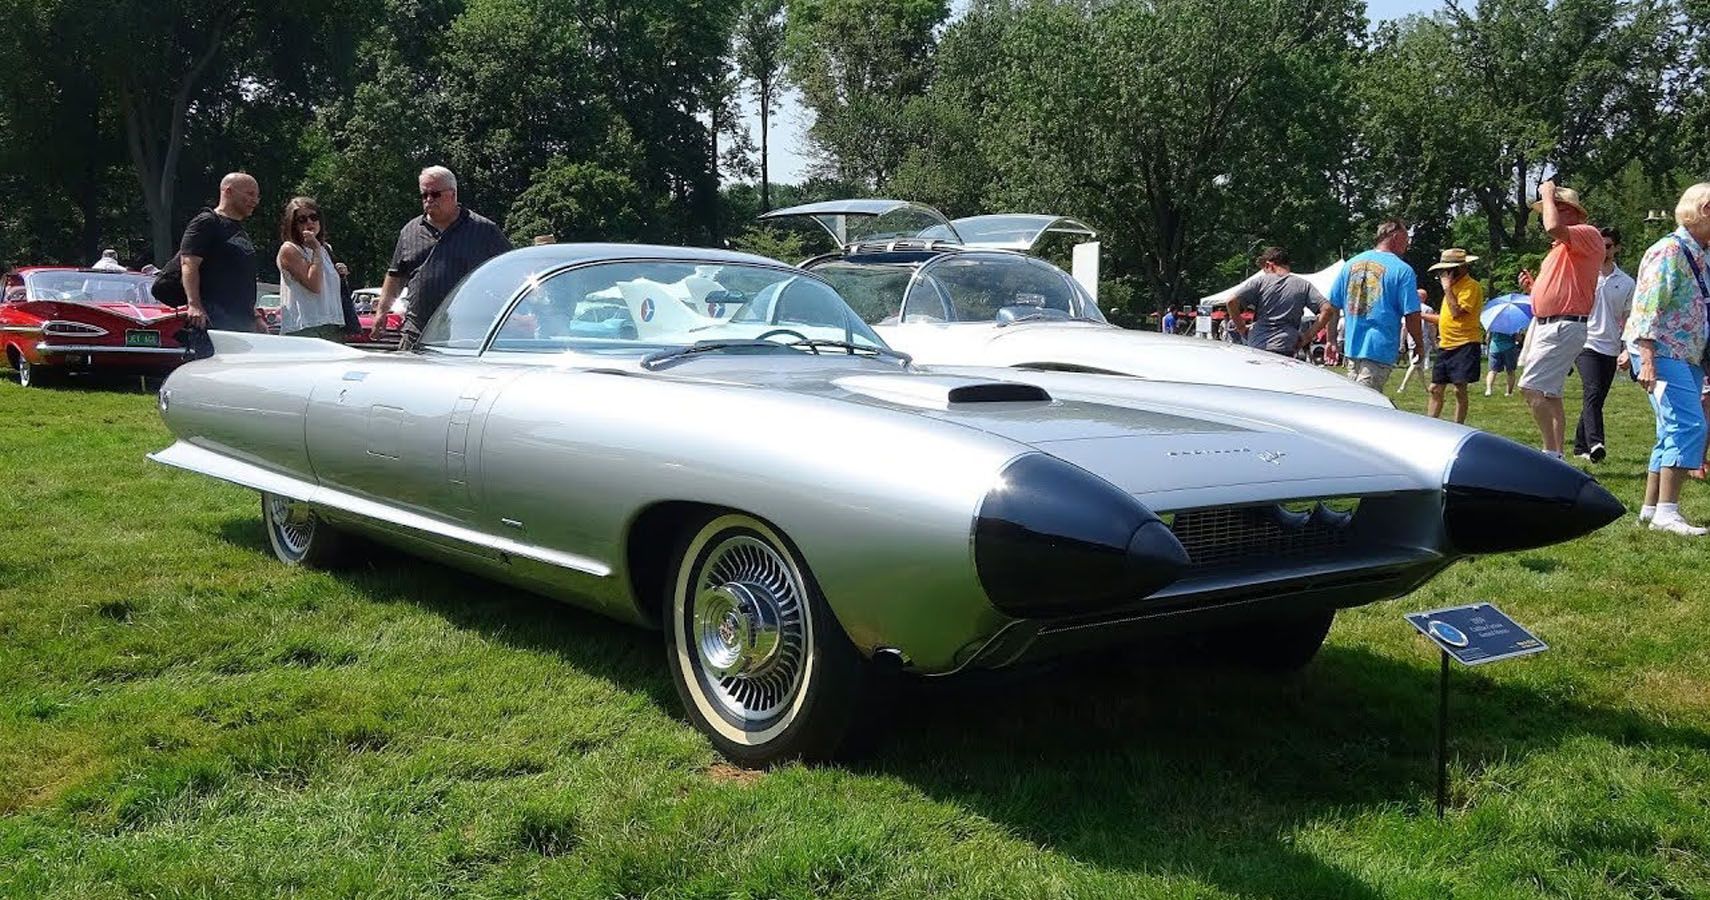 This Cadillac Cyclone Concept Car Pushed The Boundaries Of Futuristic Styling